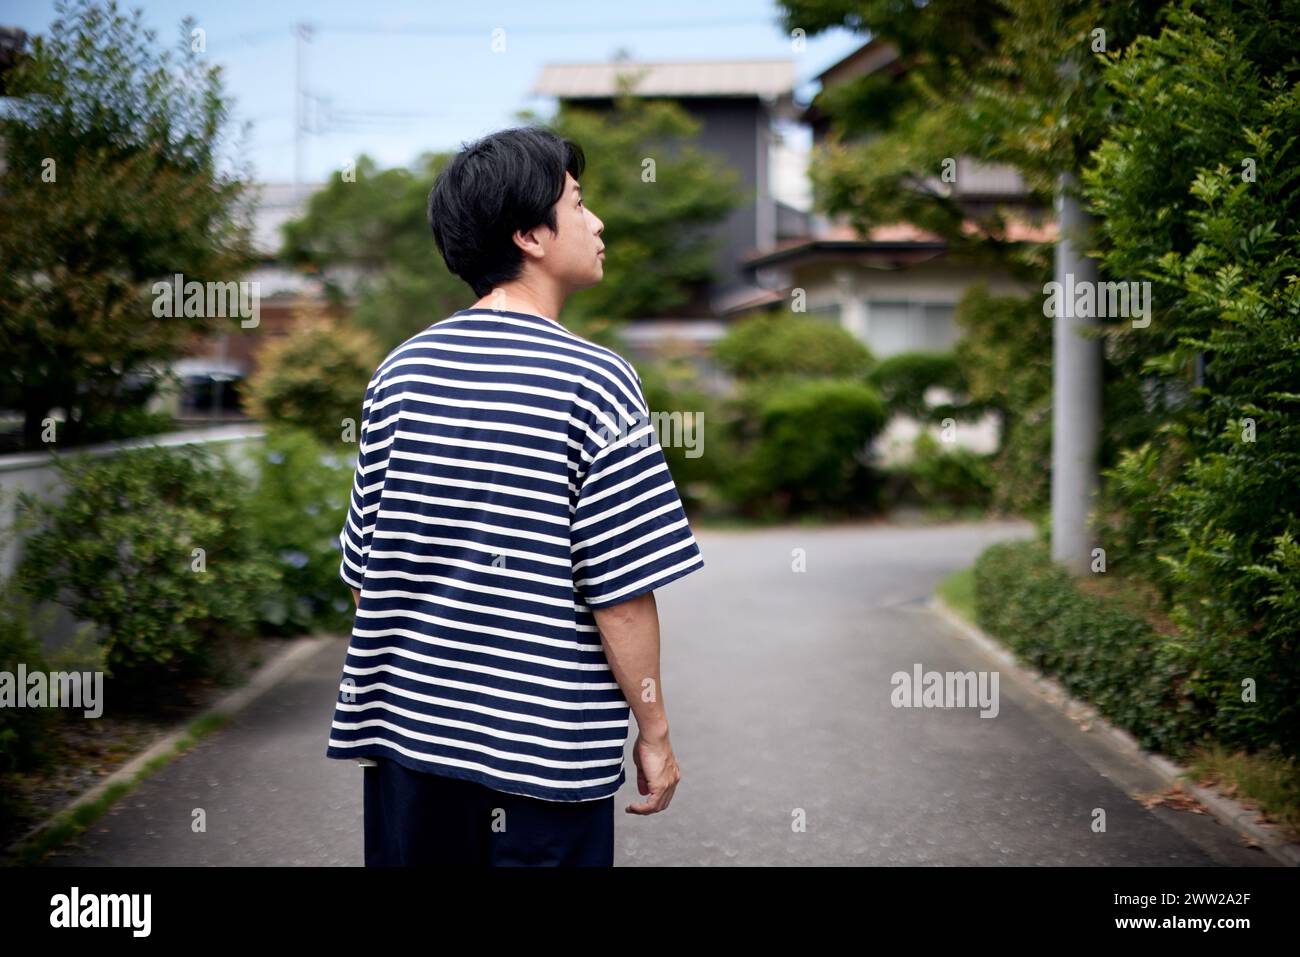 A man wearing a striped shirt stands on a street Stock Photo